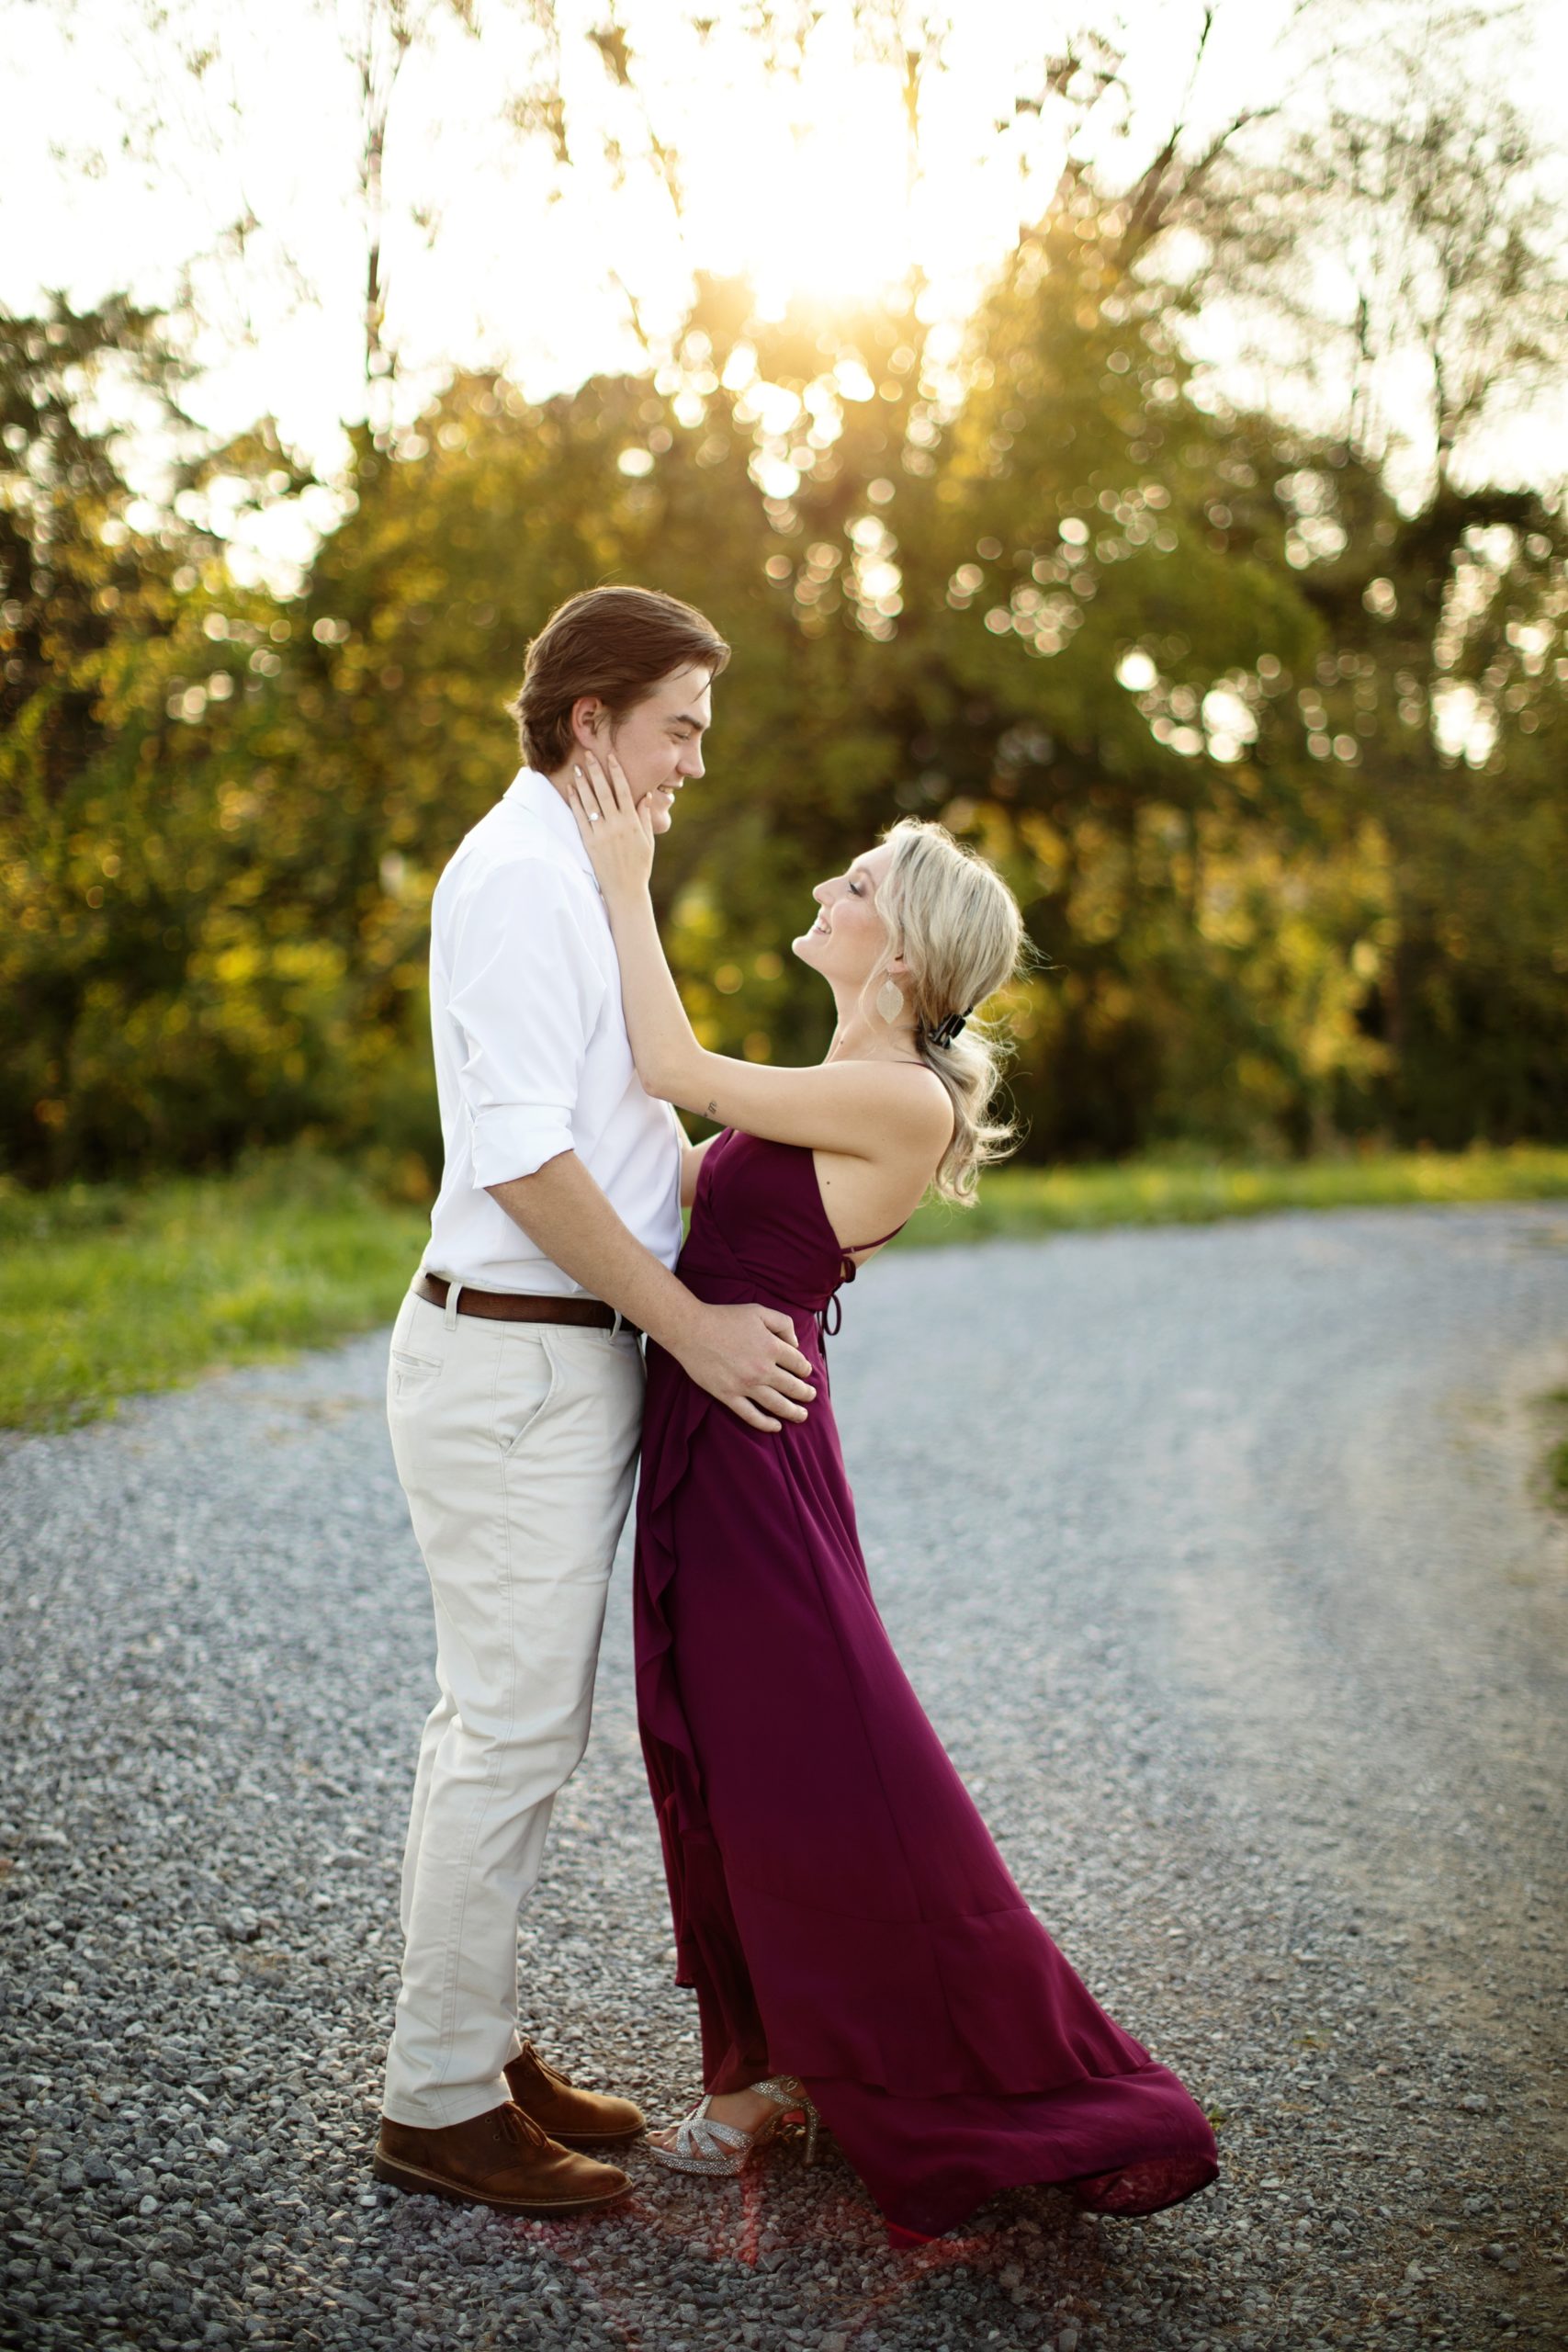 Harvest View Barn Engagement Photos-Lancaster Pa Wedding and Engagement Photographer